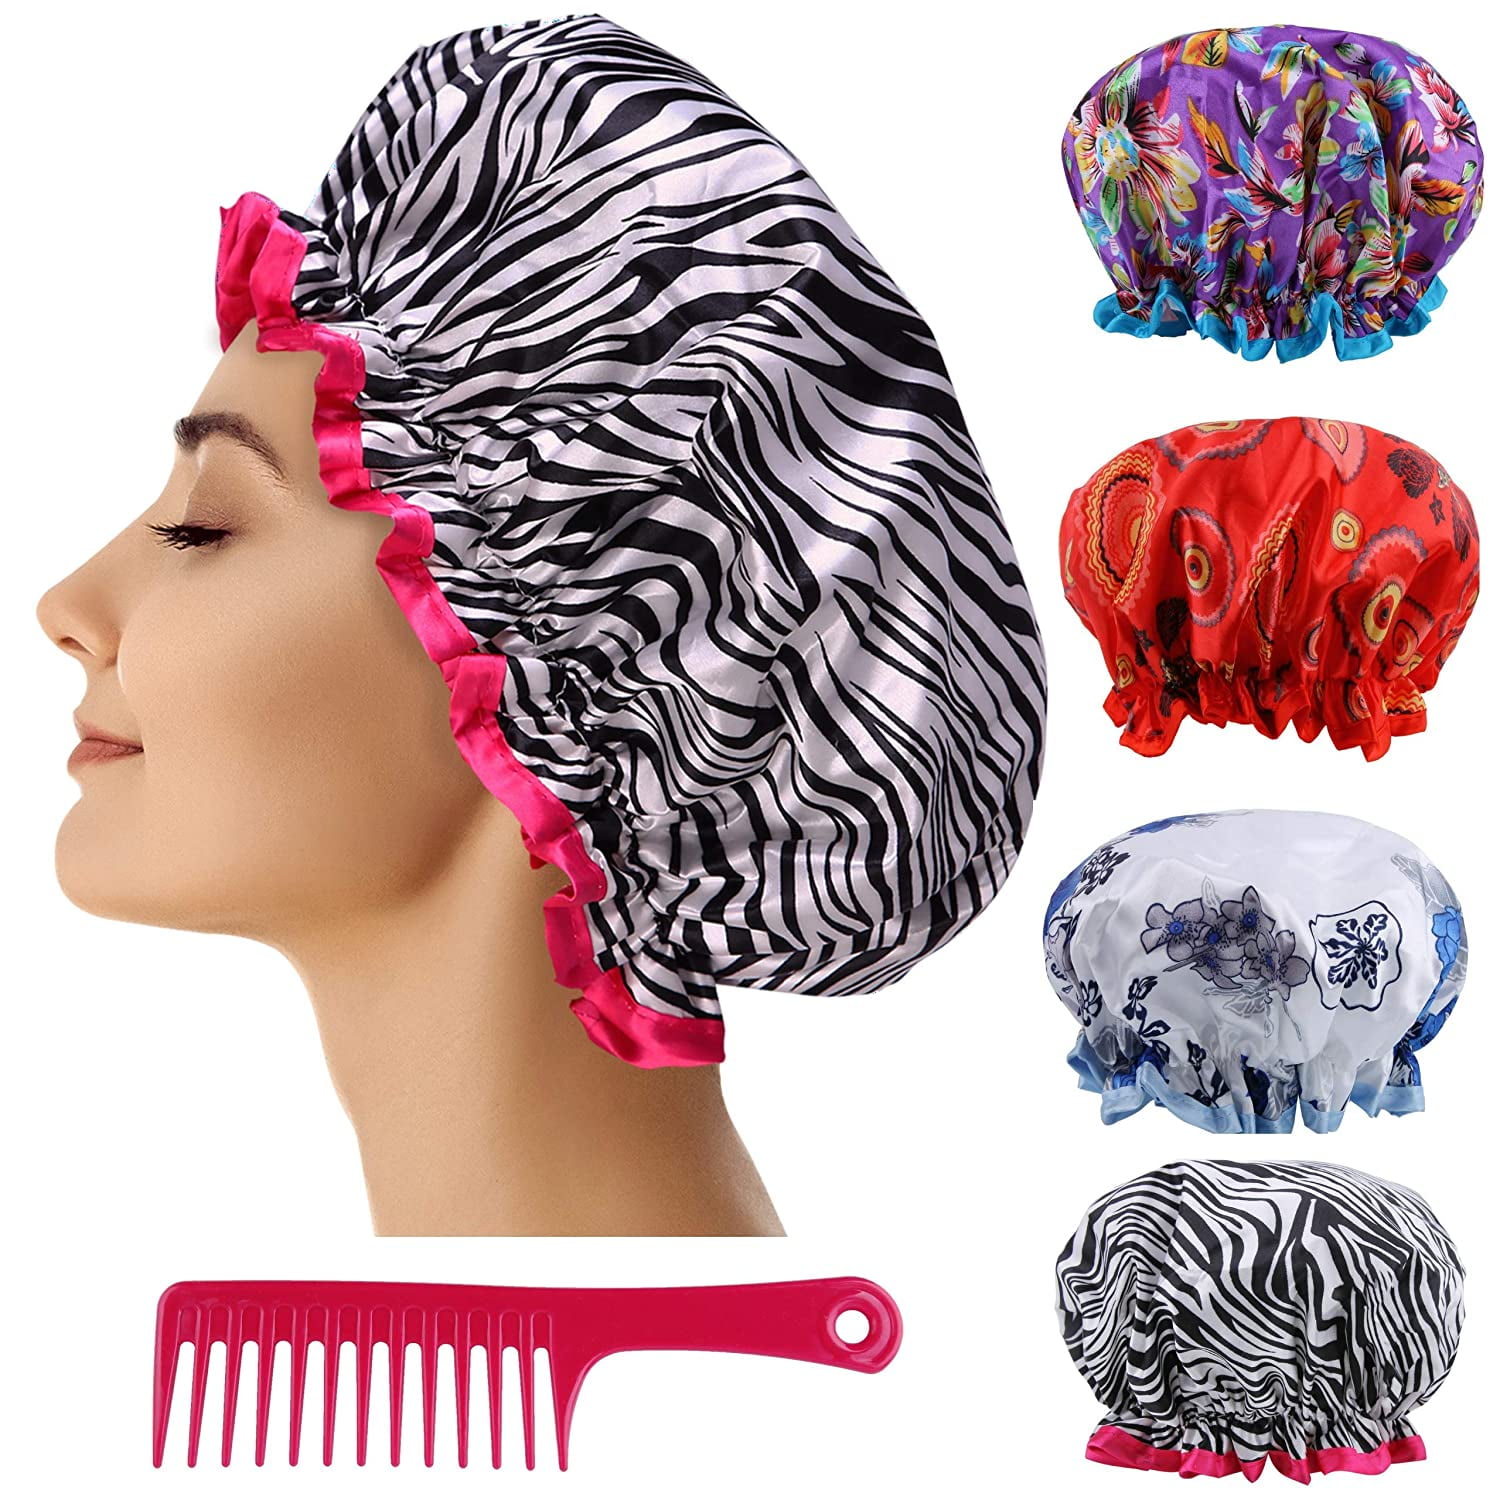 Reusable Shower Cap Women Hair - (Pack of 4) Lined Plastic Showercap  Waterproof Bath Hat Hair Cover Caps Bundled with 1 Detangling Comb Perfect  for all Hair Lengths and Thicknesses 